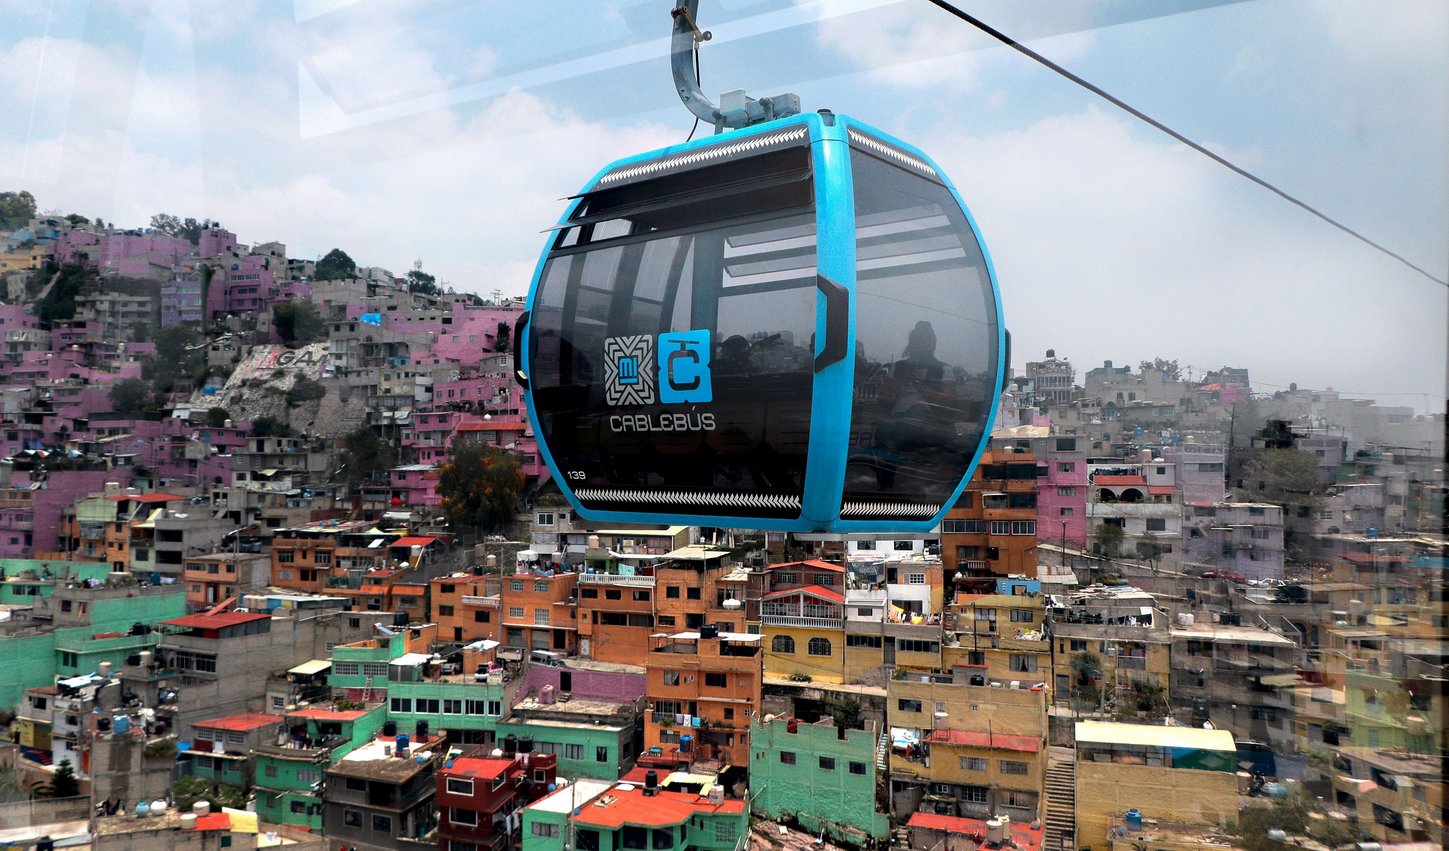 Photo of gondolas of the ropeway, in the background the Mexico City panorama of rooftops and mountains.